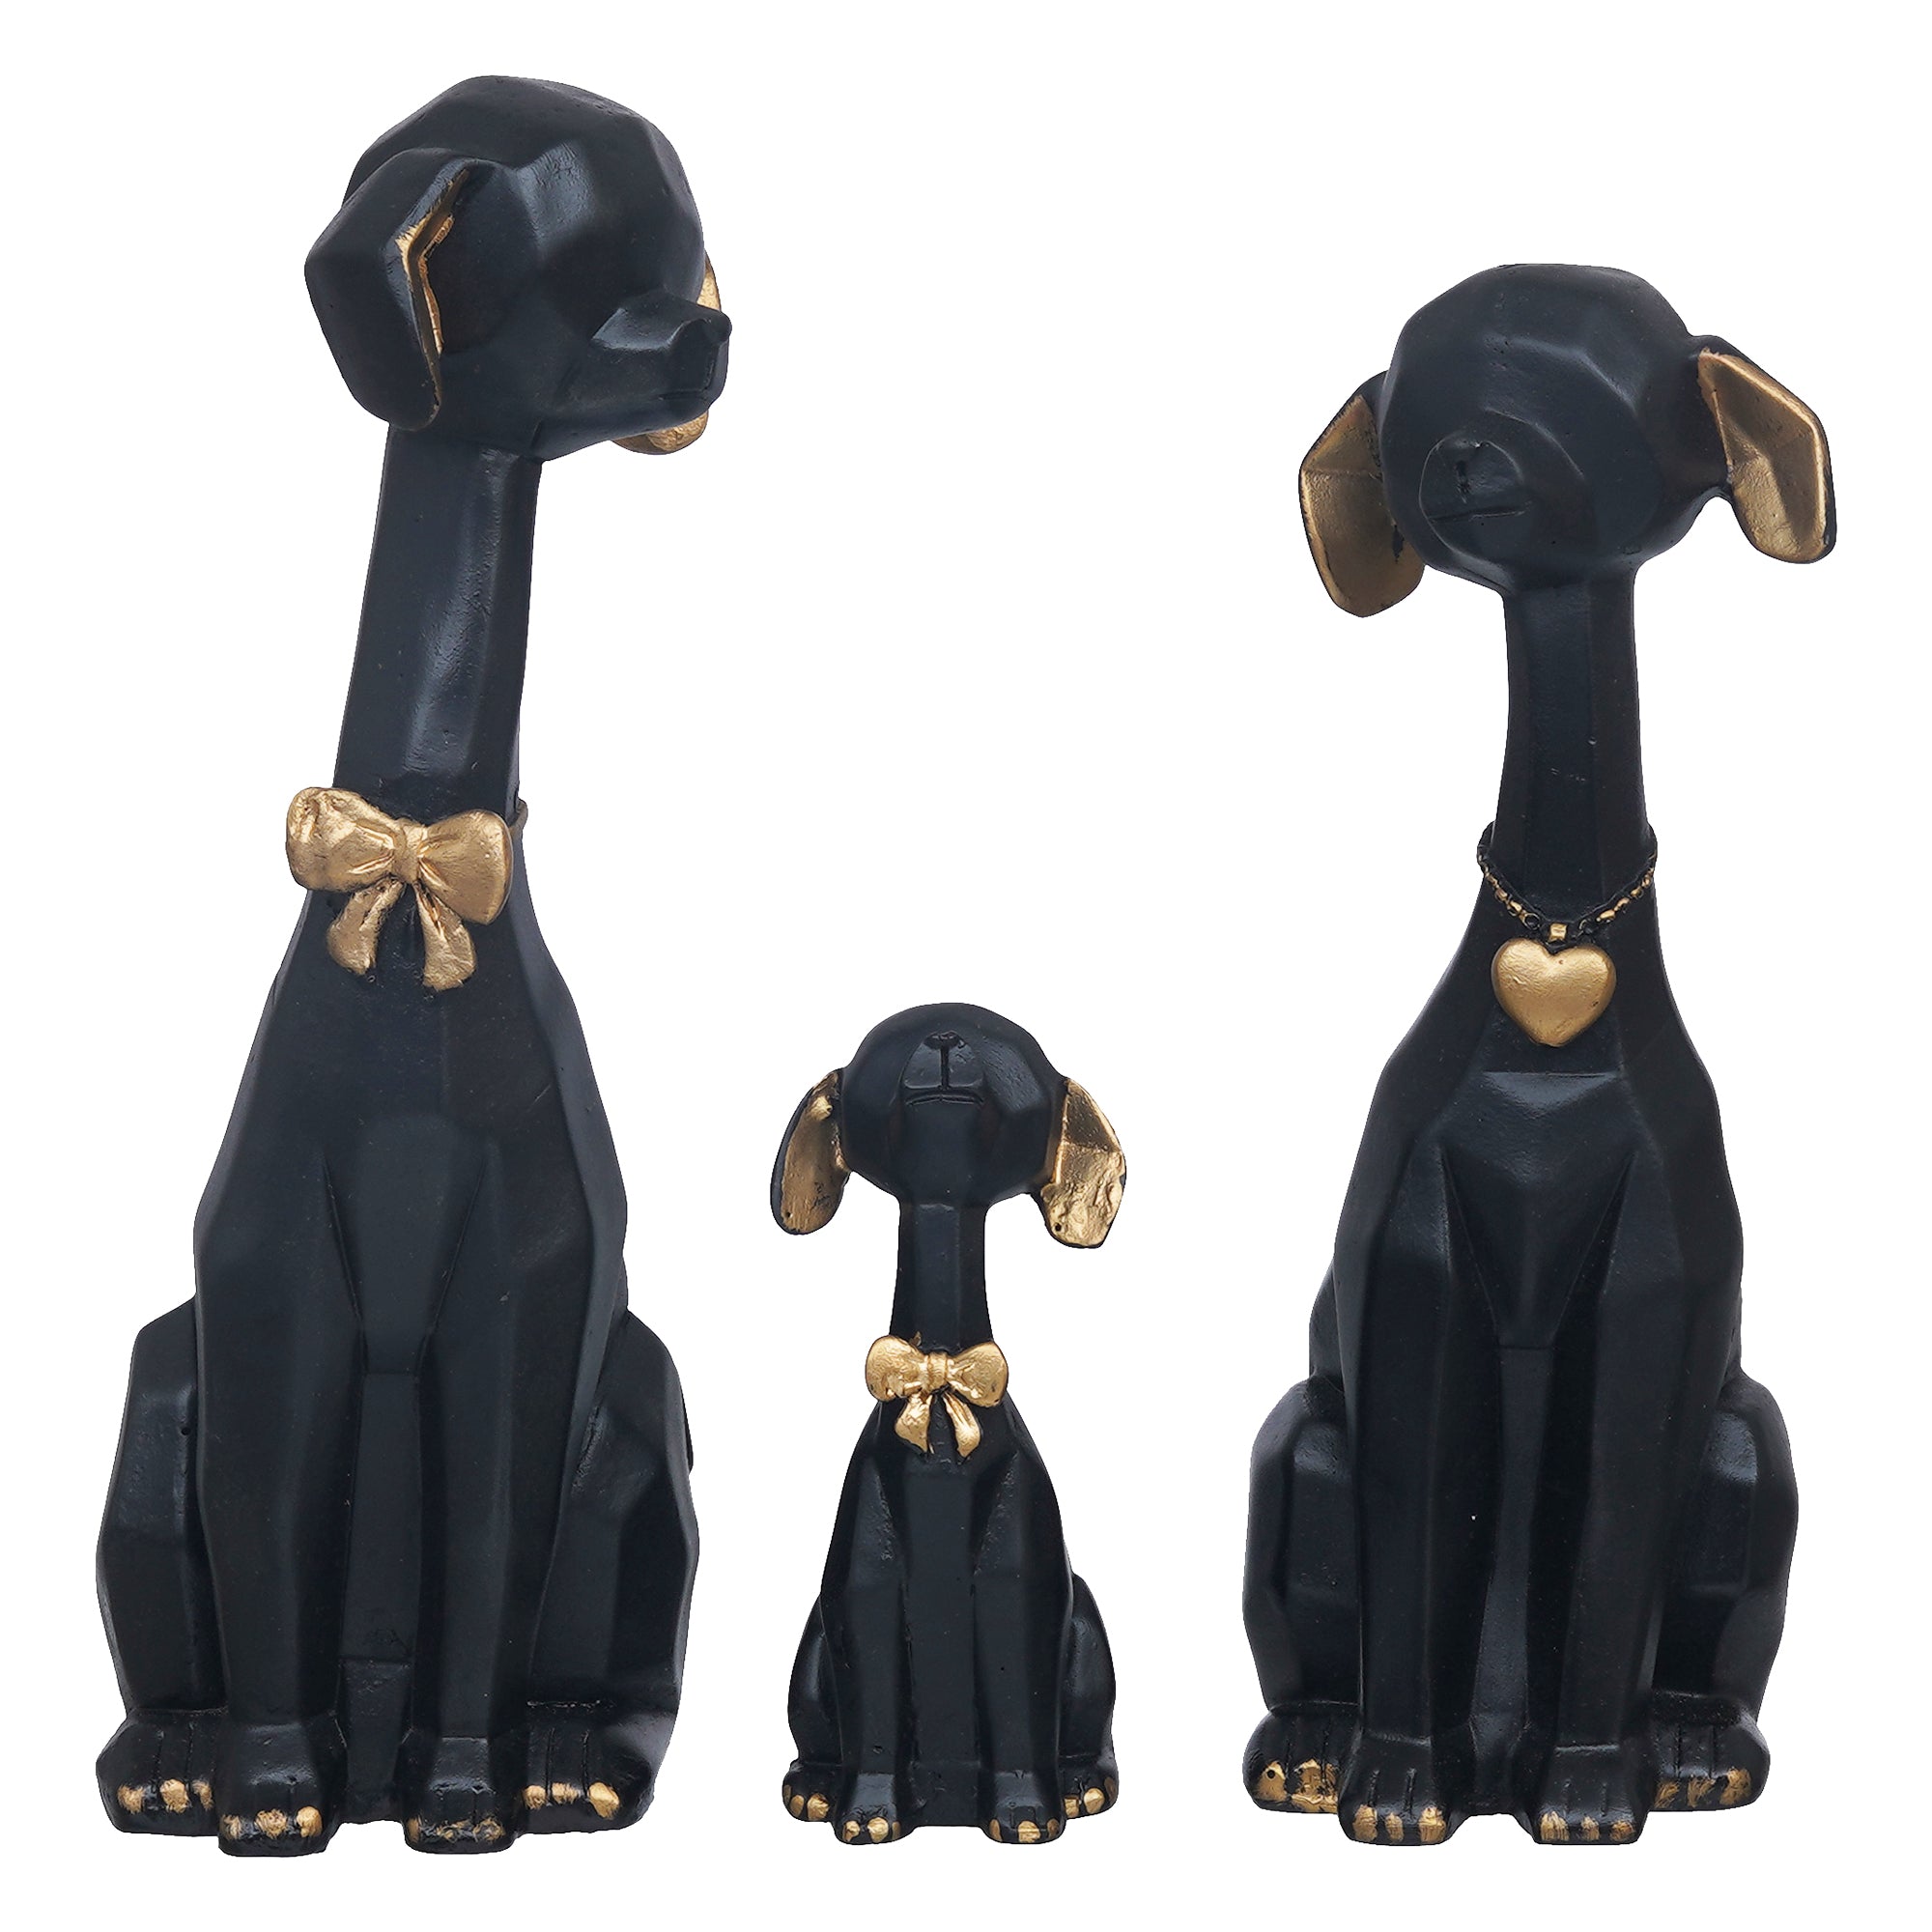 eCraftIndia Black and Golden Set of 3 Cute Dog Statues Animal Figurines Decorative Showpieces for Home Decor 2